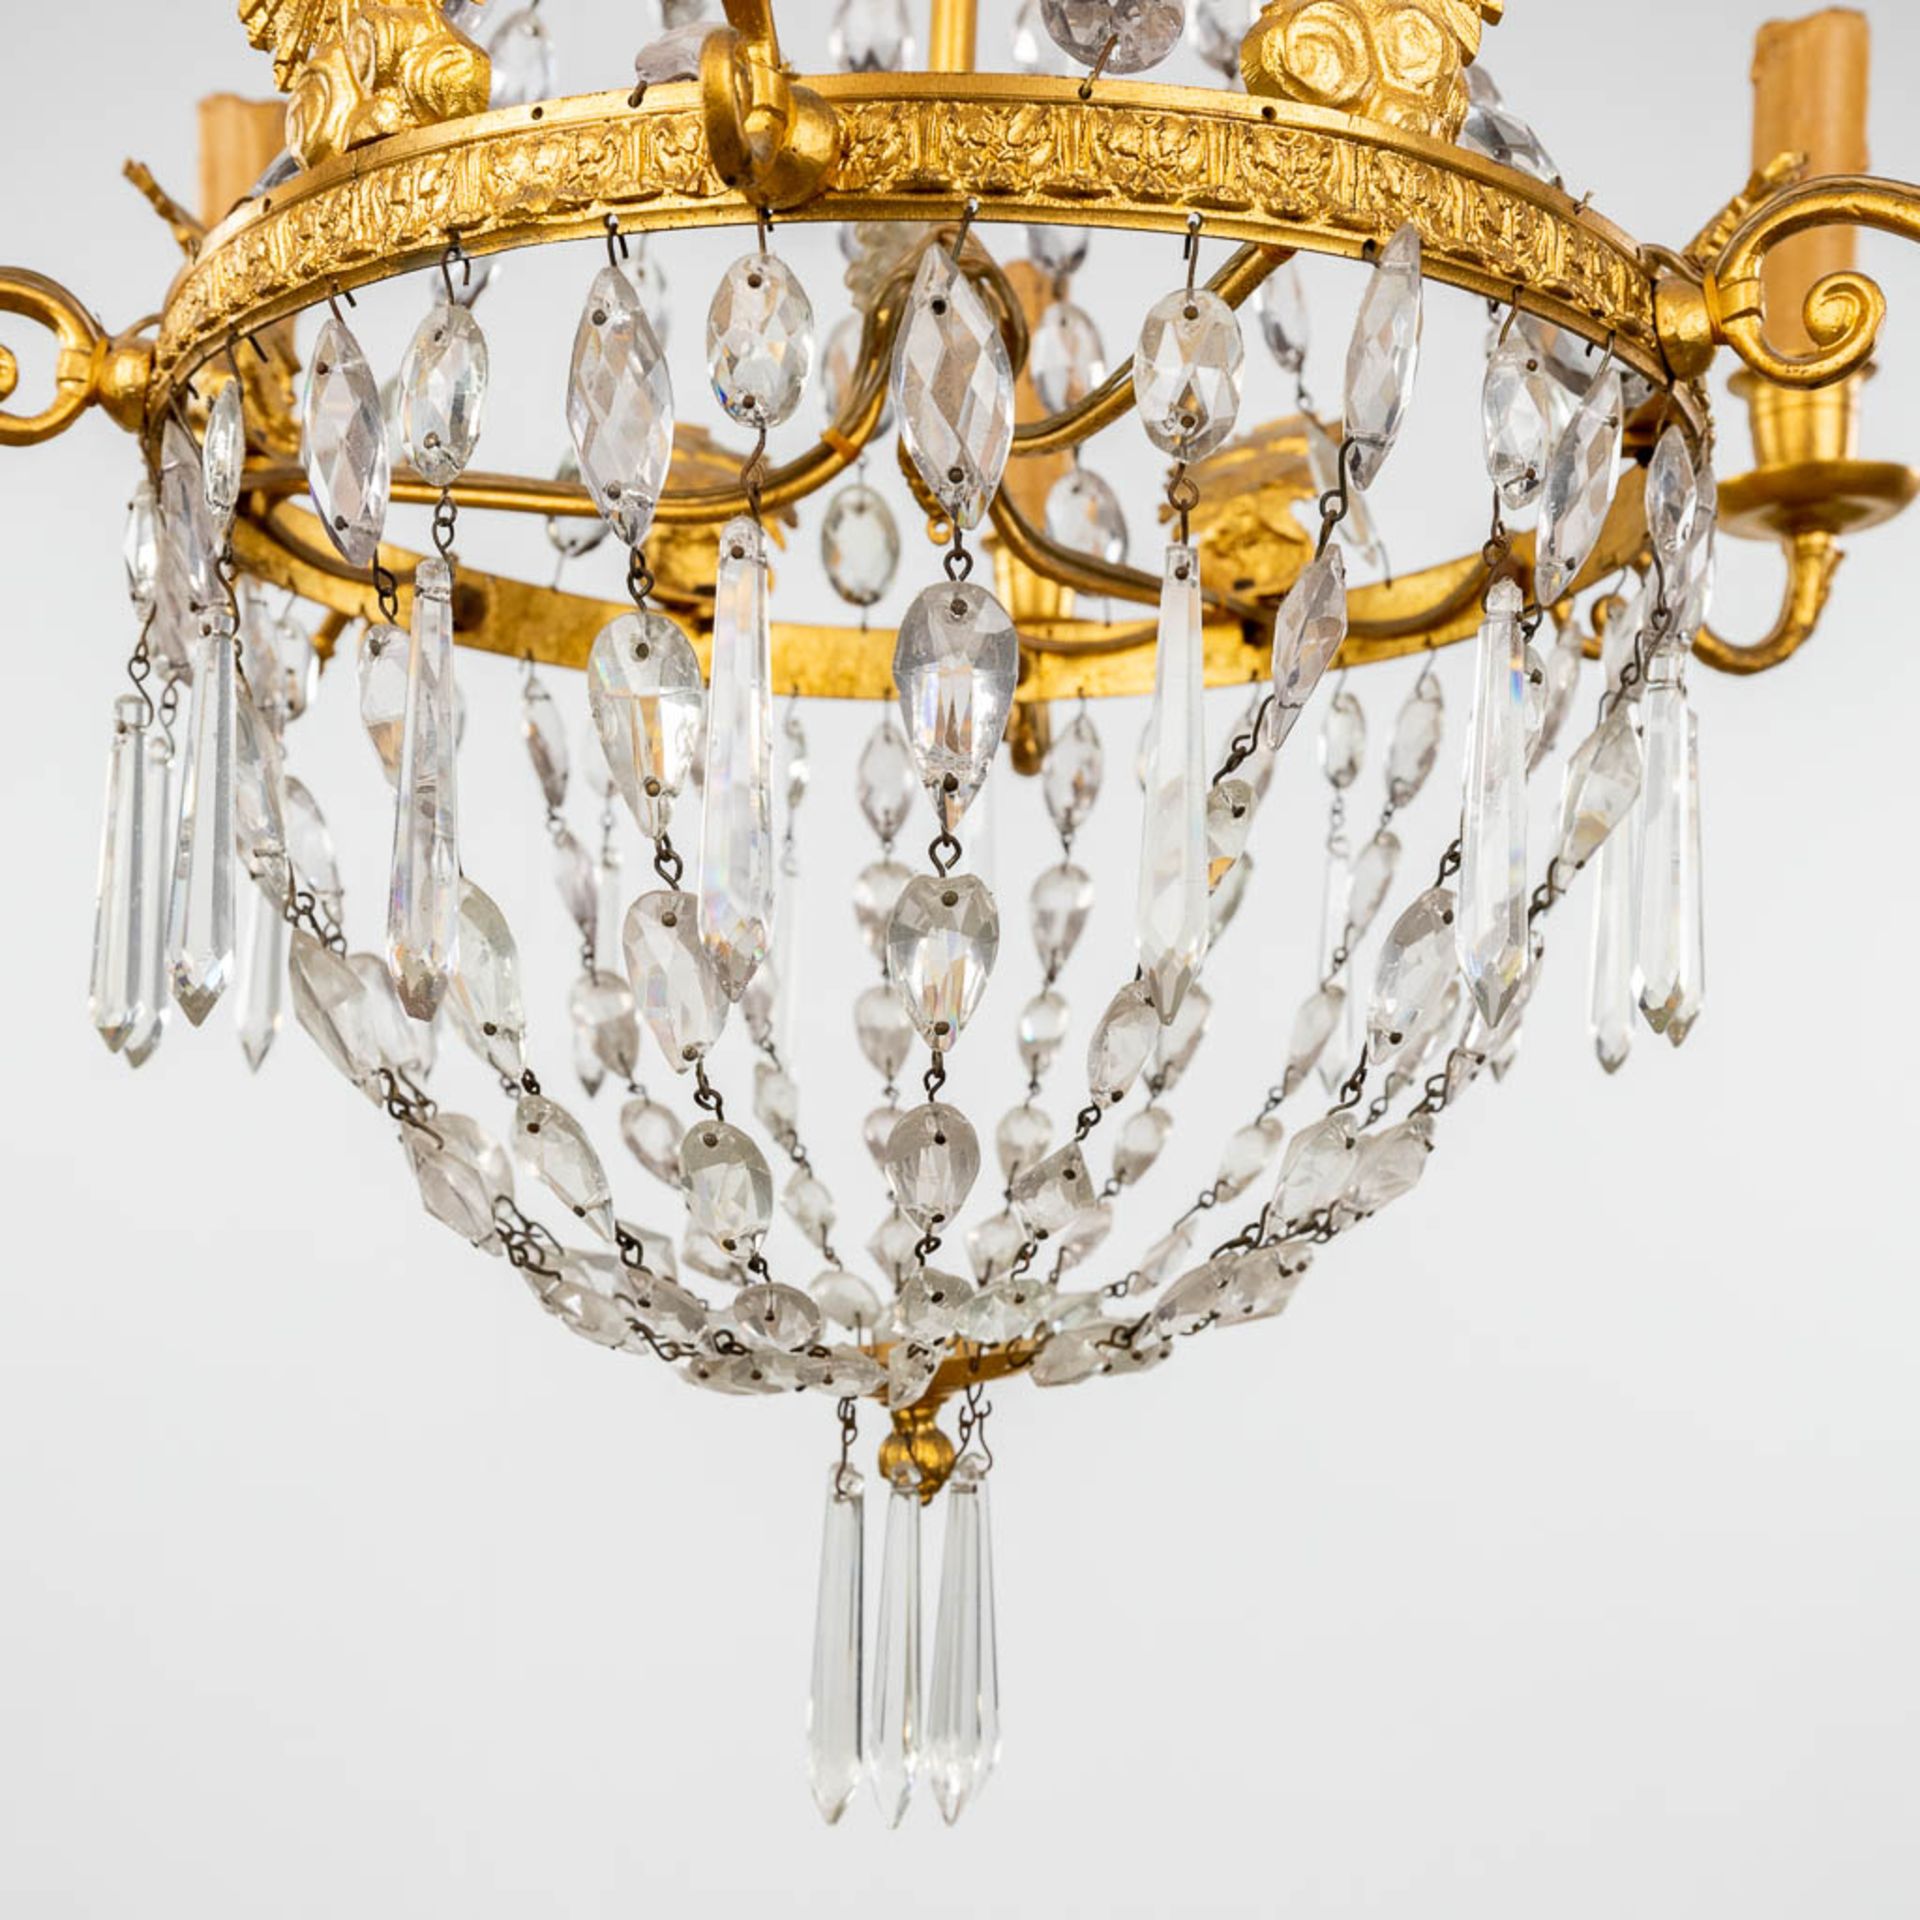 A chandelier 'Sac ˆ Perles', bronze and glass in empire style. 20th C. (H: 100 x D: 50 cm) - Image 6 of 11